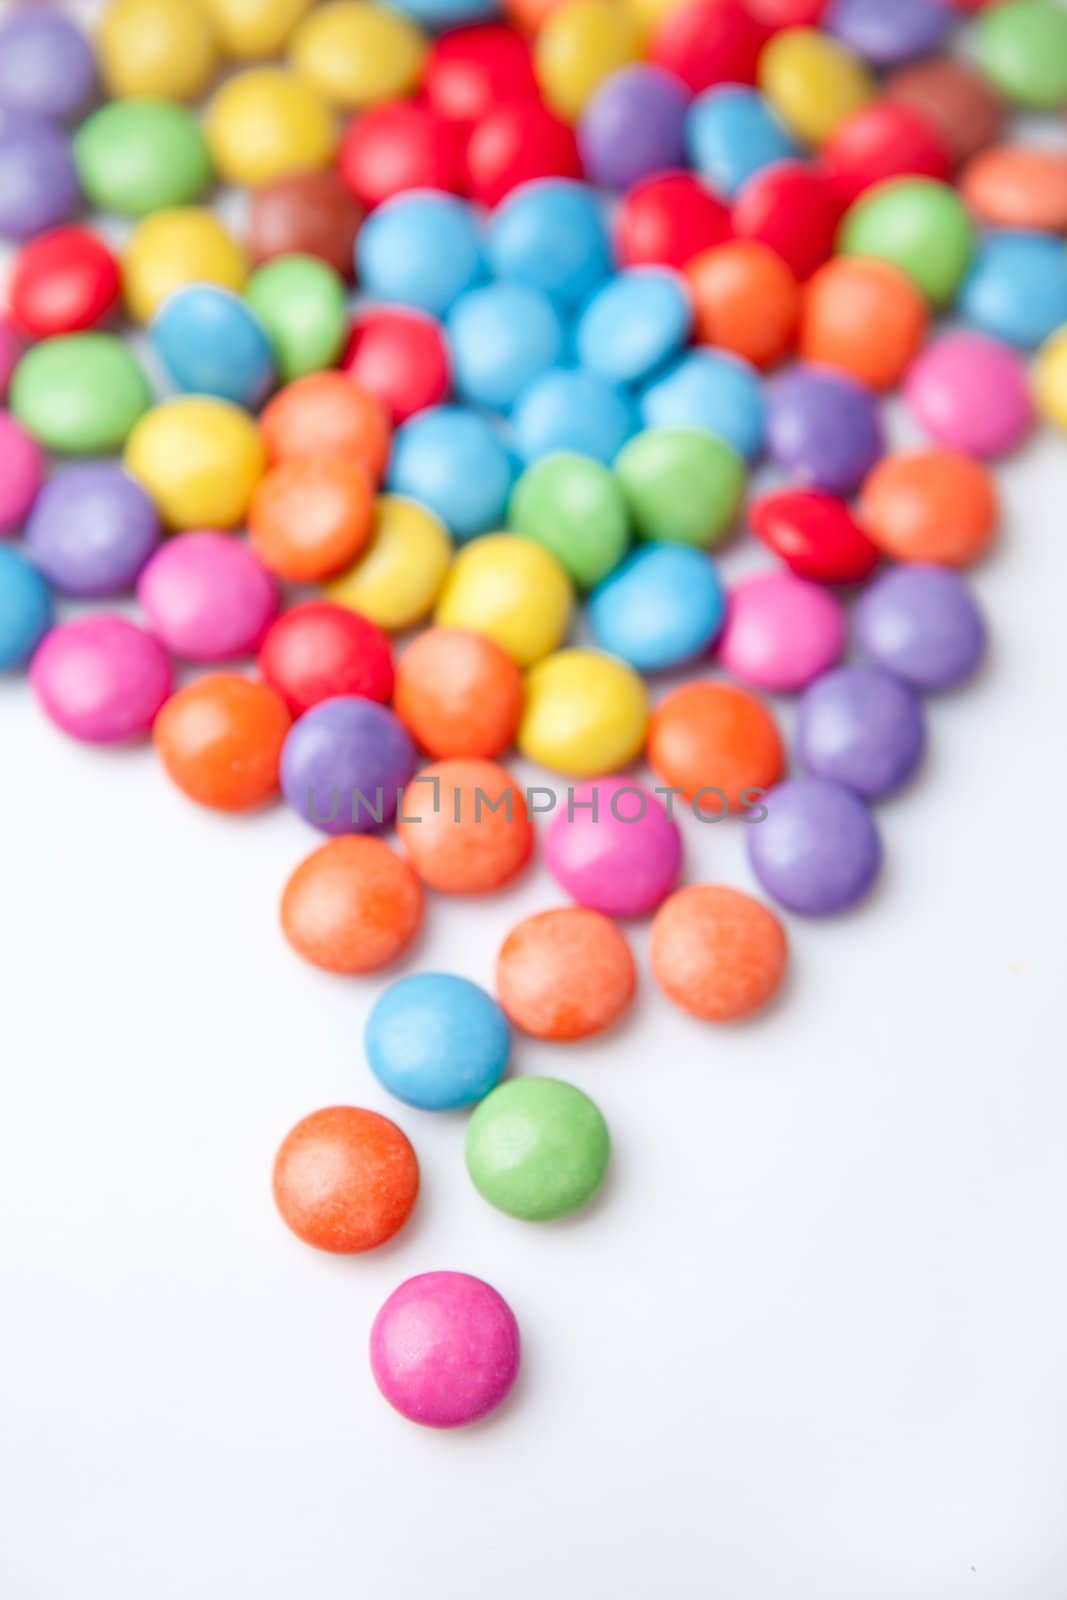 Multicolored chocolate candies by Wavebreakmedia